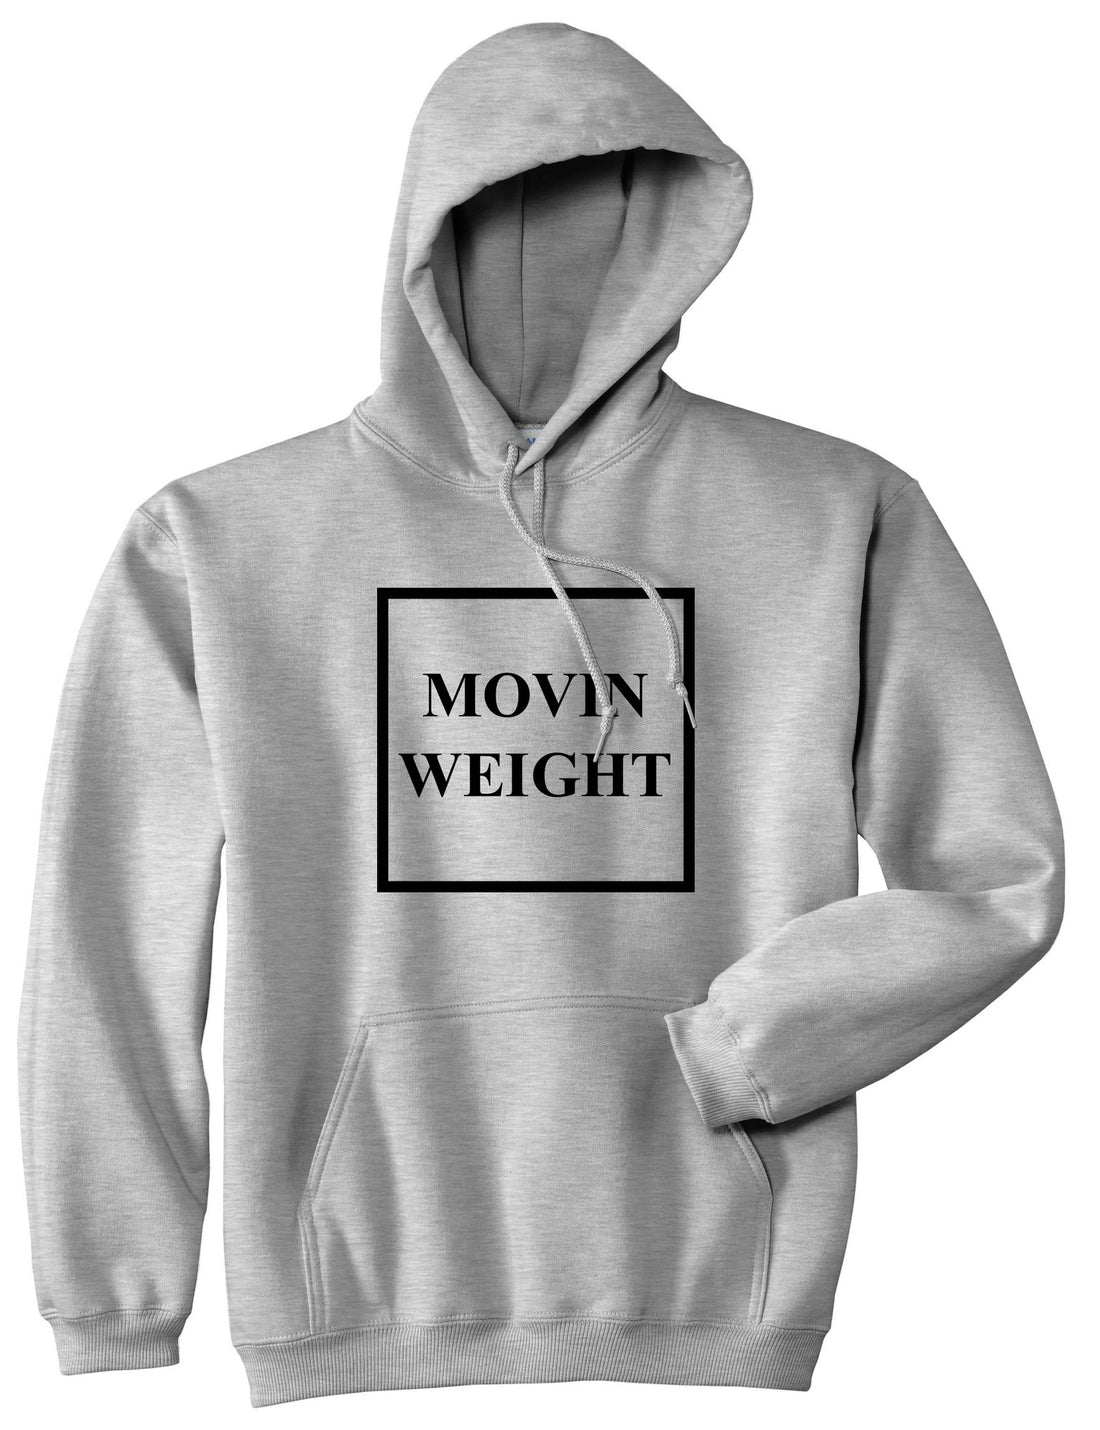 Movin Weight Hustler Pullover Hoodie Hoody in Grey by Kings Of NY